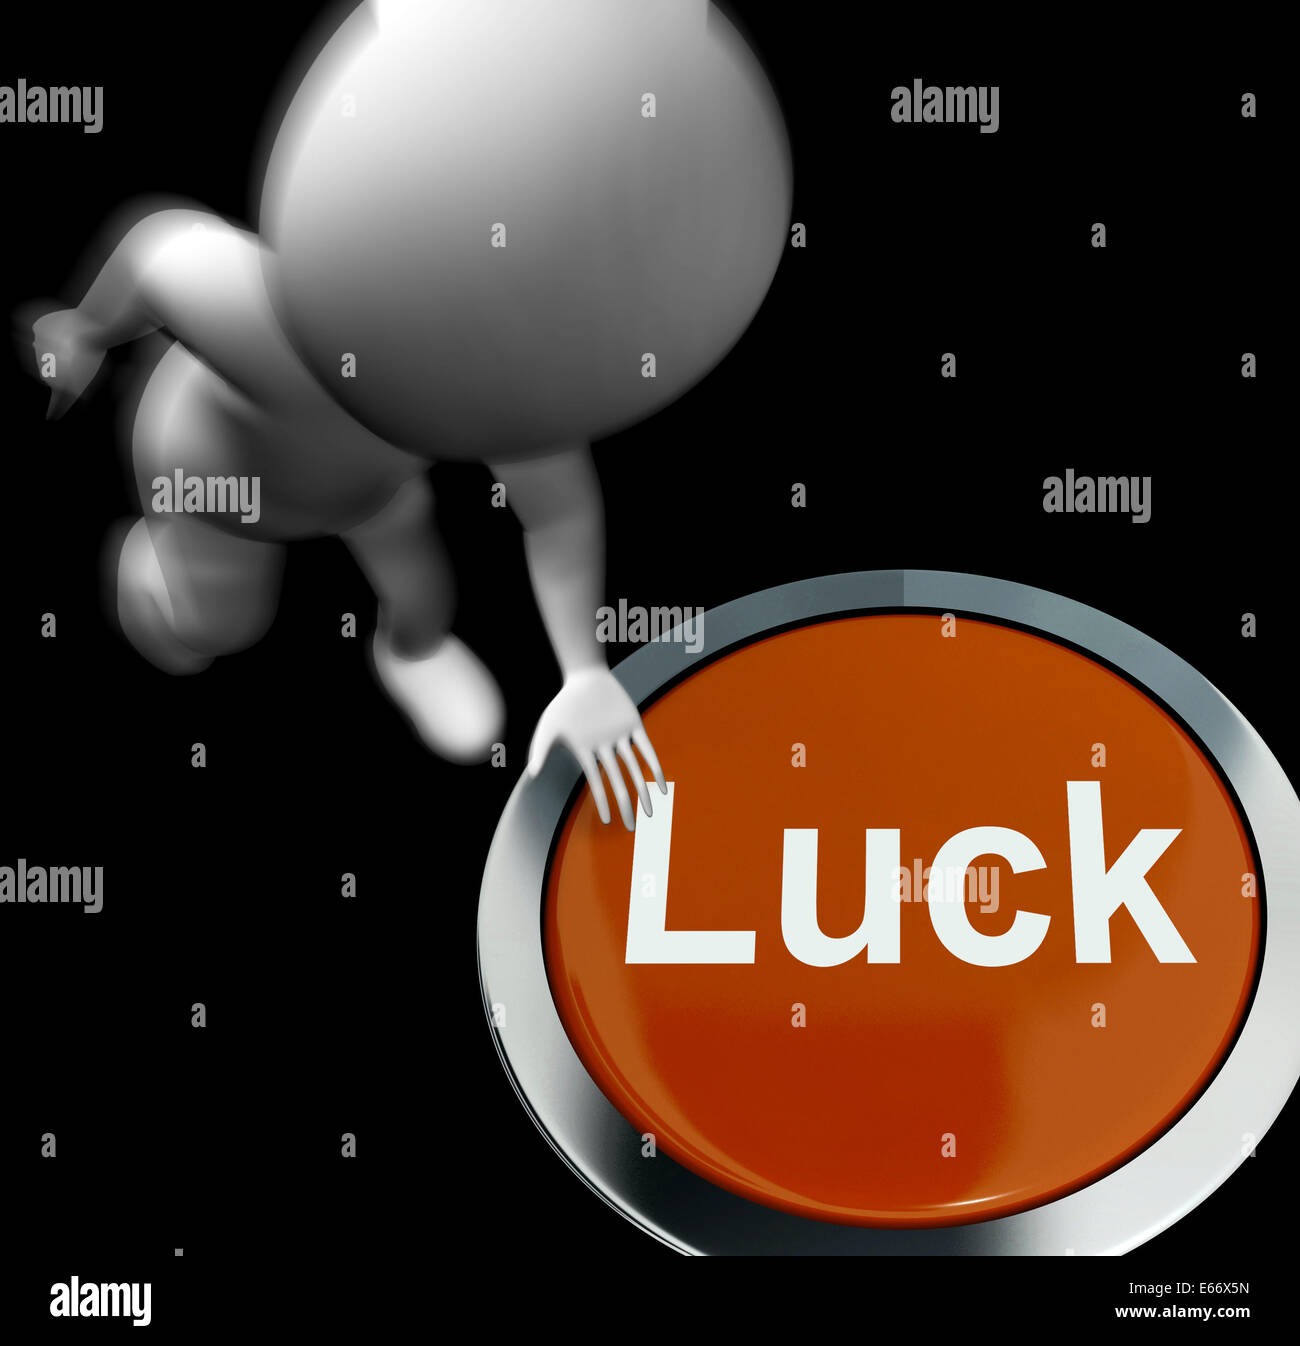 Luck Pressed Showing Chance Gamble Or Fortunate Stock Photo